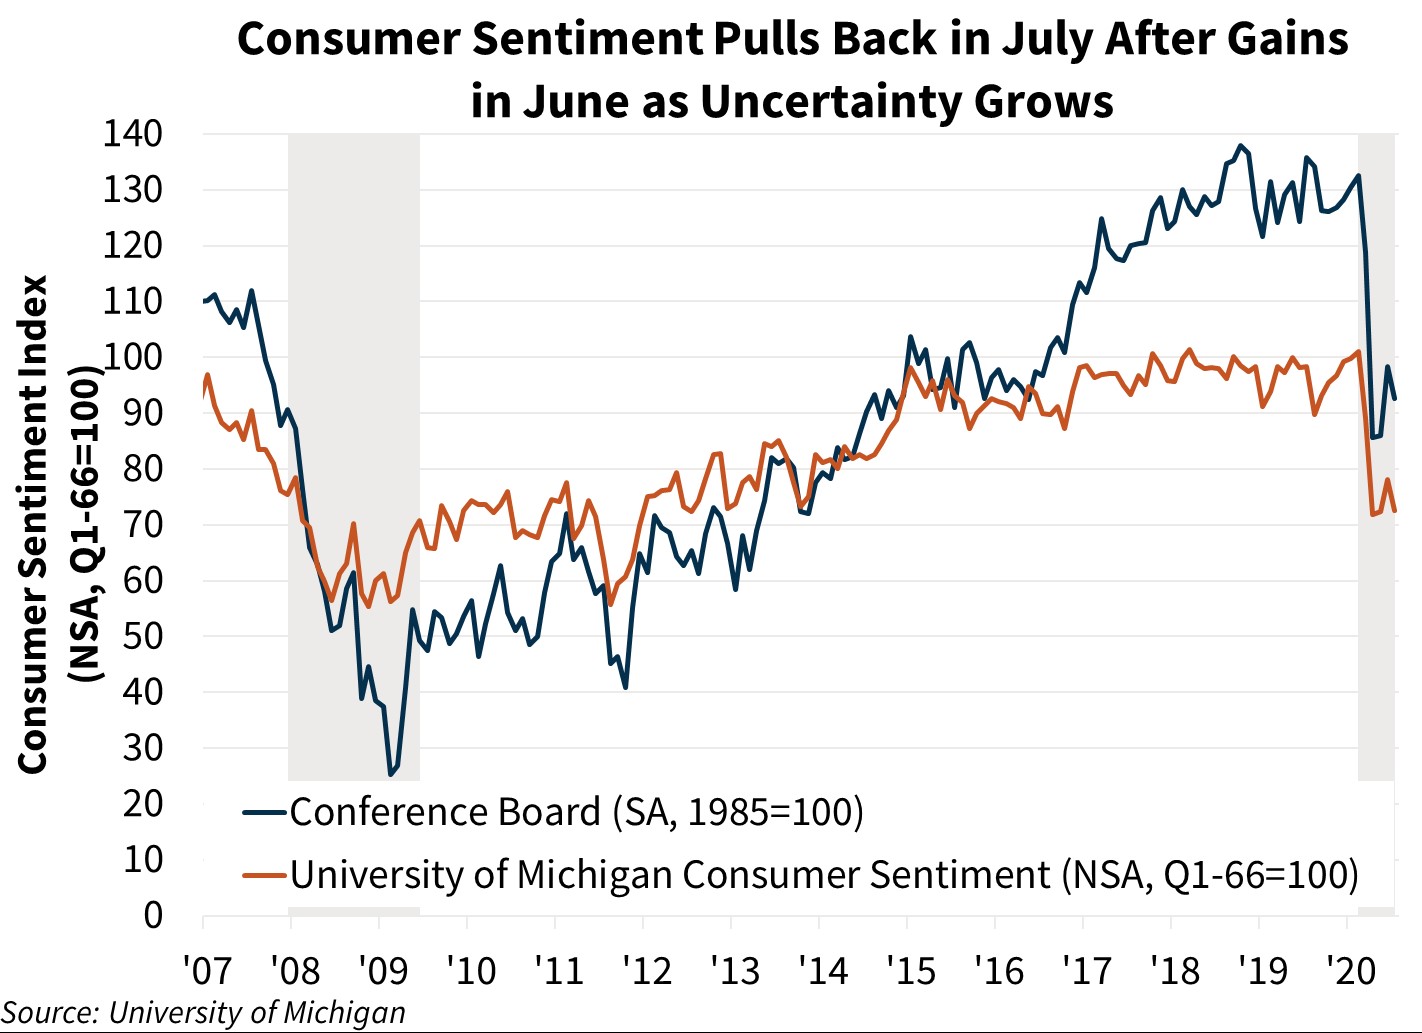 Consumer Sentiment Pulls back in July After gains in June as Uncertainty Grows 